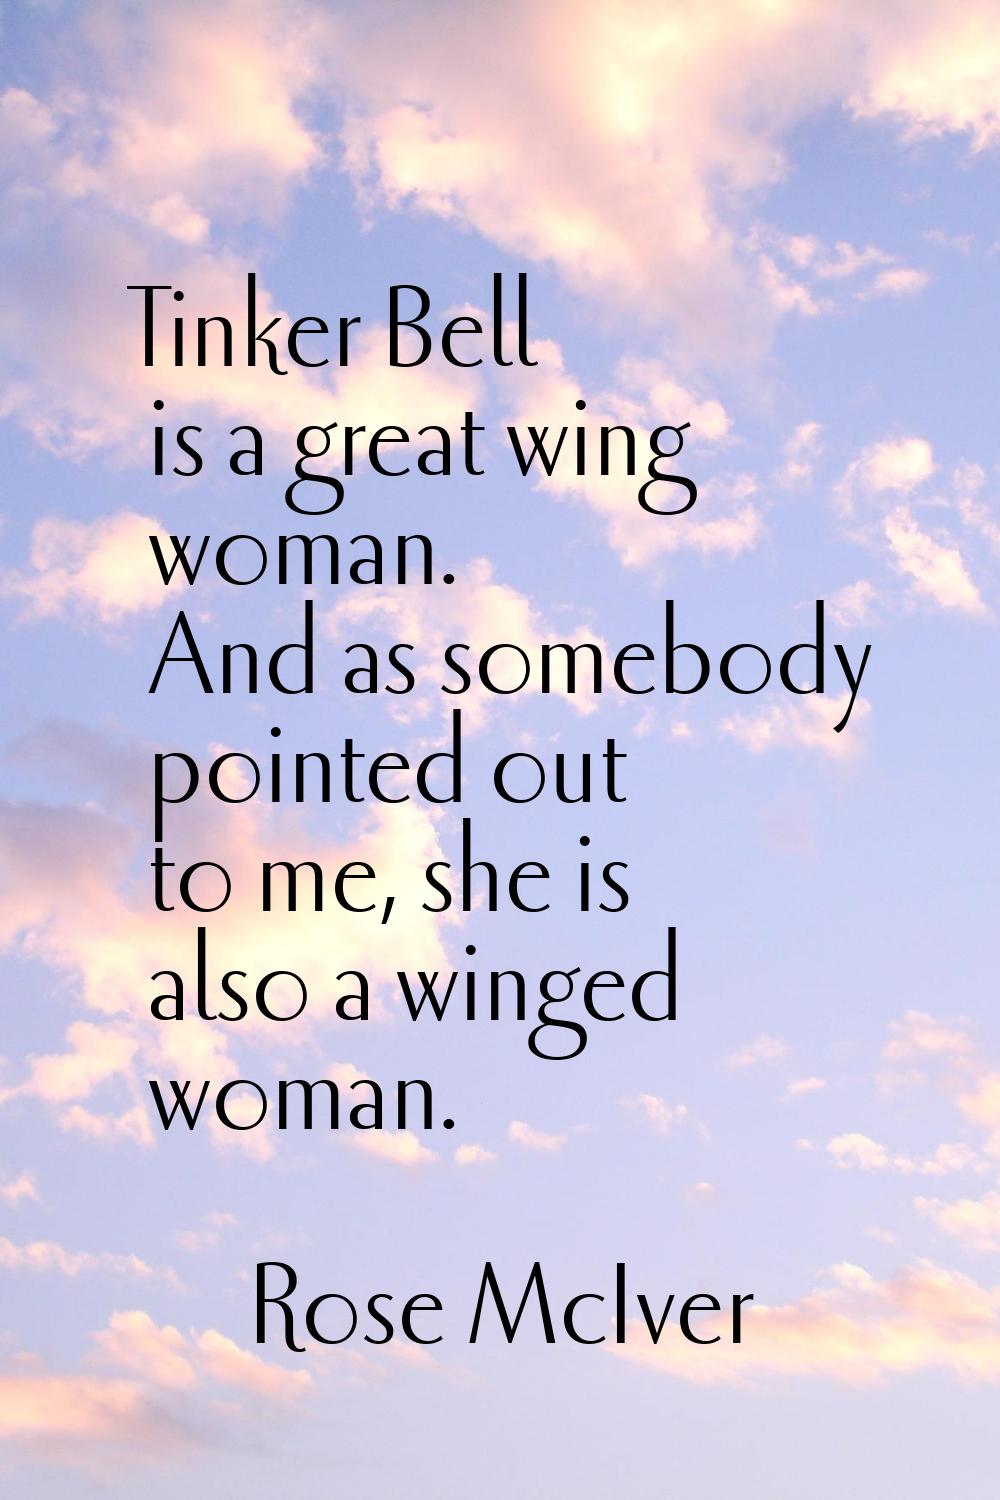 Tinker Bell is a great wing woman. And as somebody pointed out to me, she is also a winged woman.